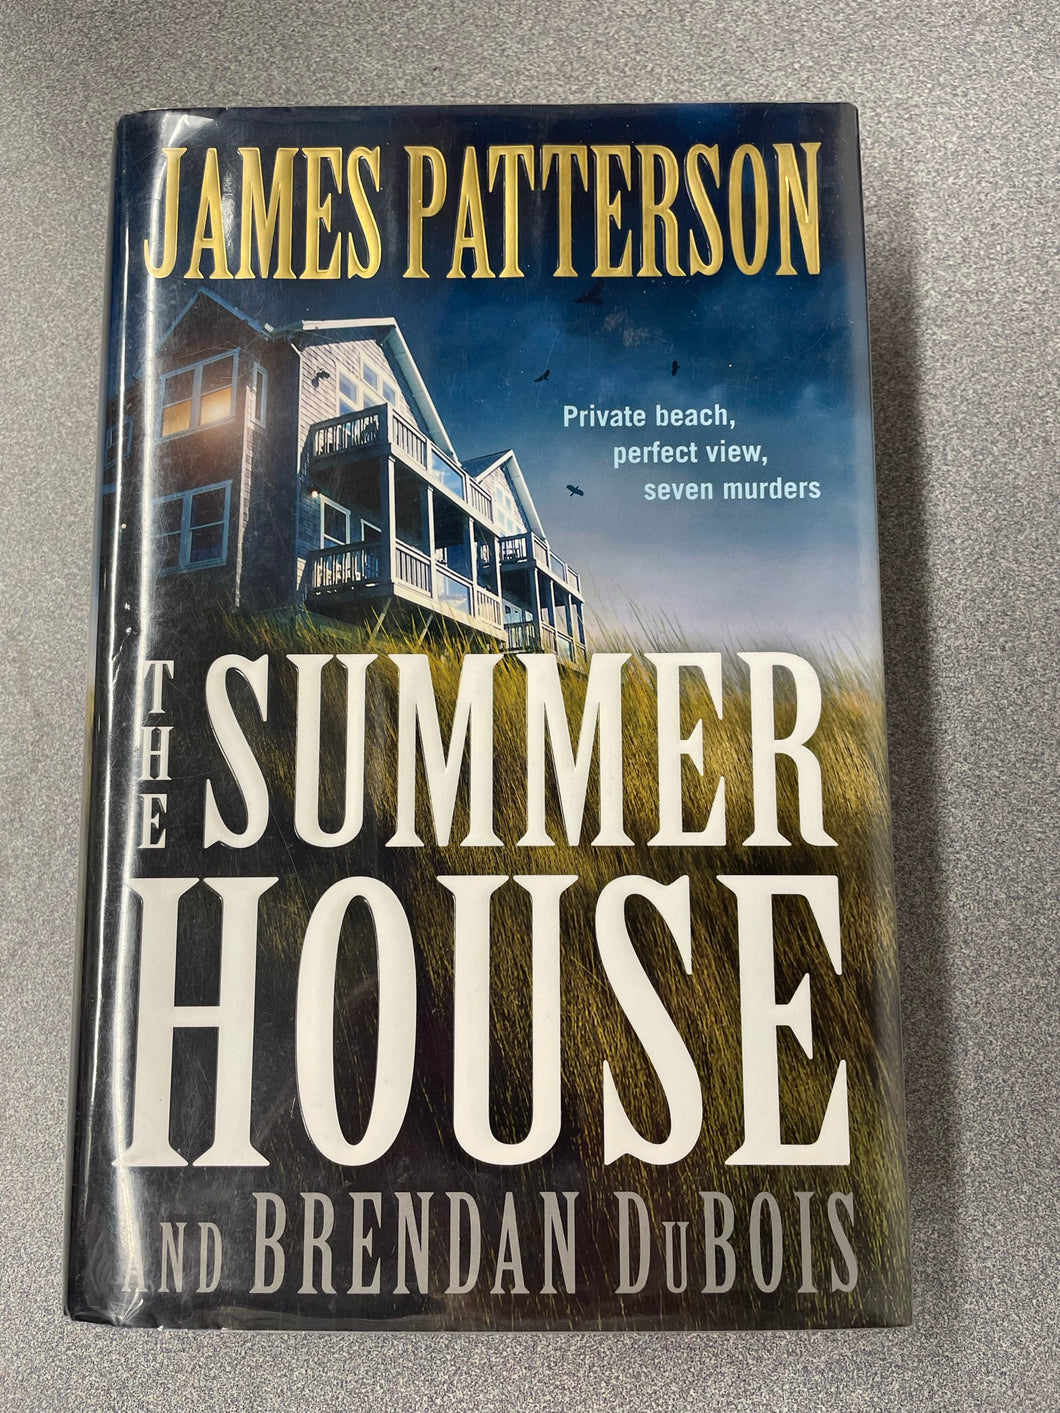 Patterson, James and Brendan DuBois, The Summer House [2020] MY 6/23